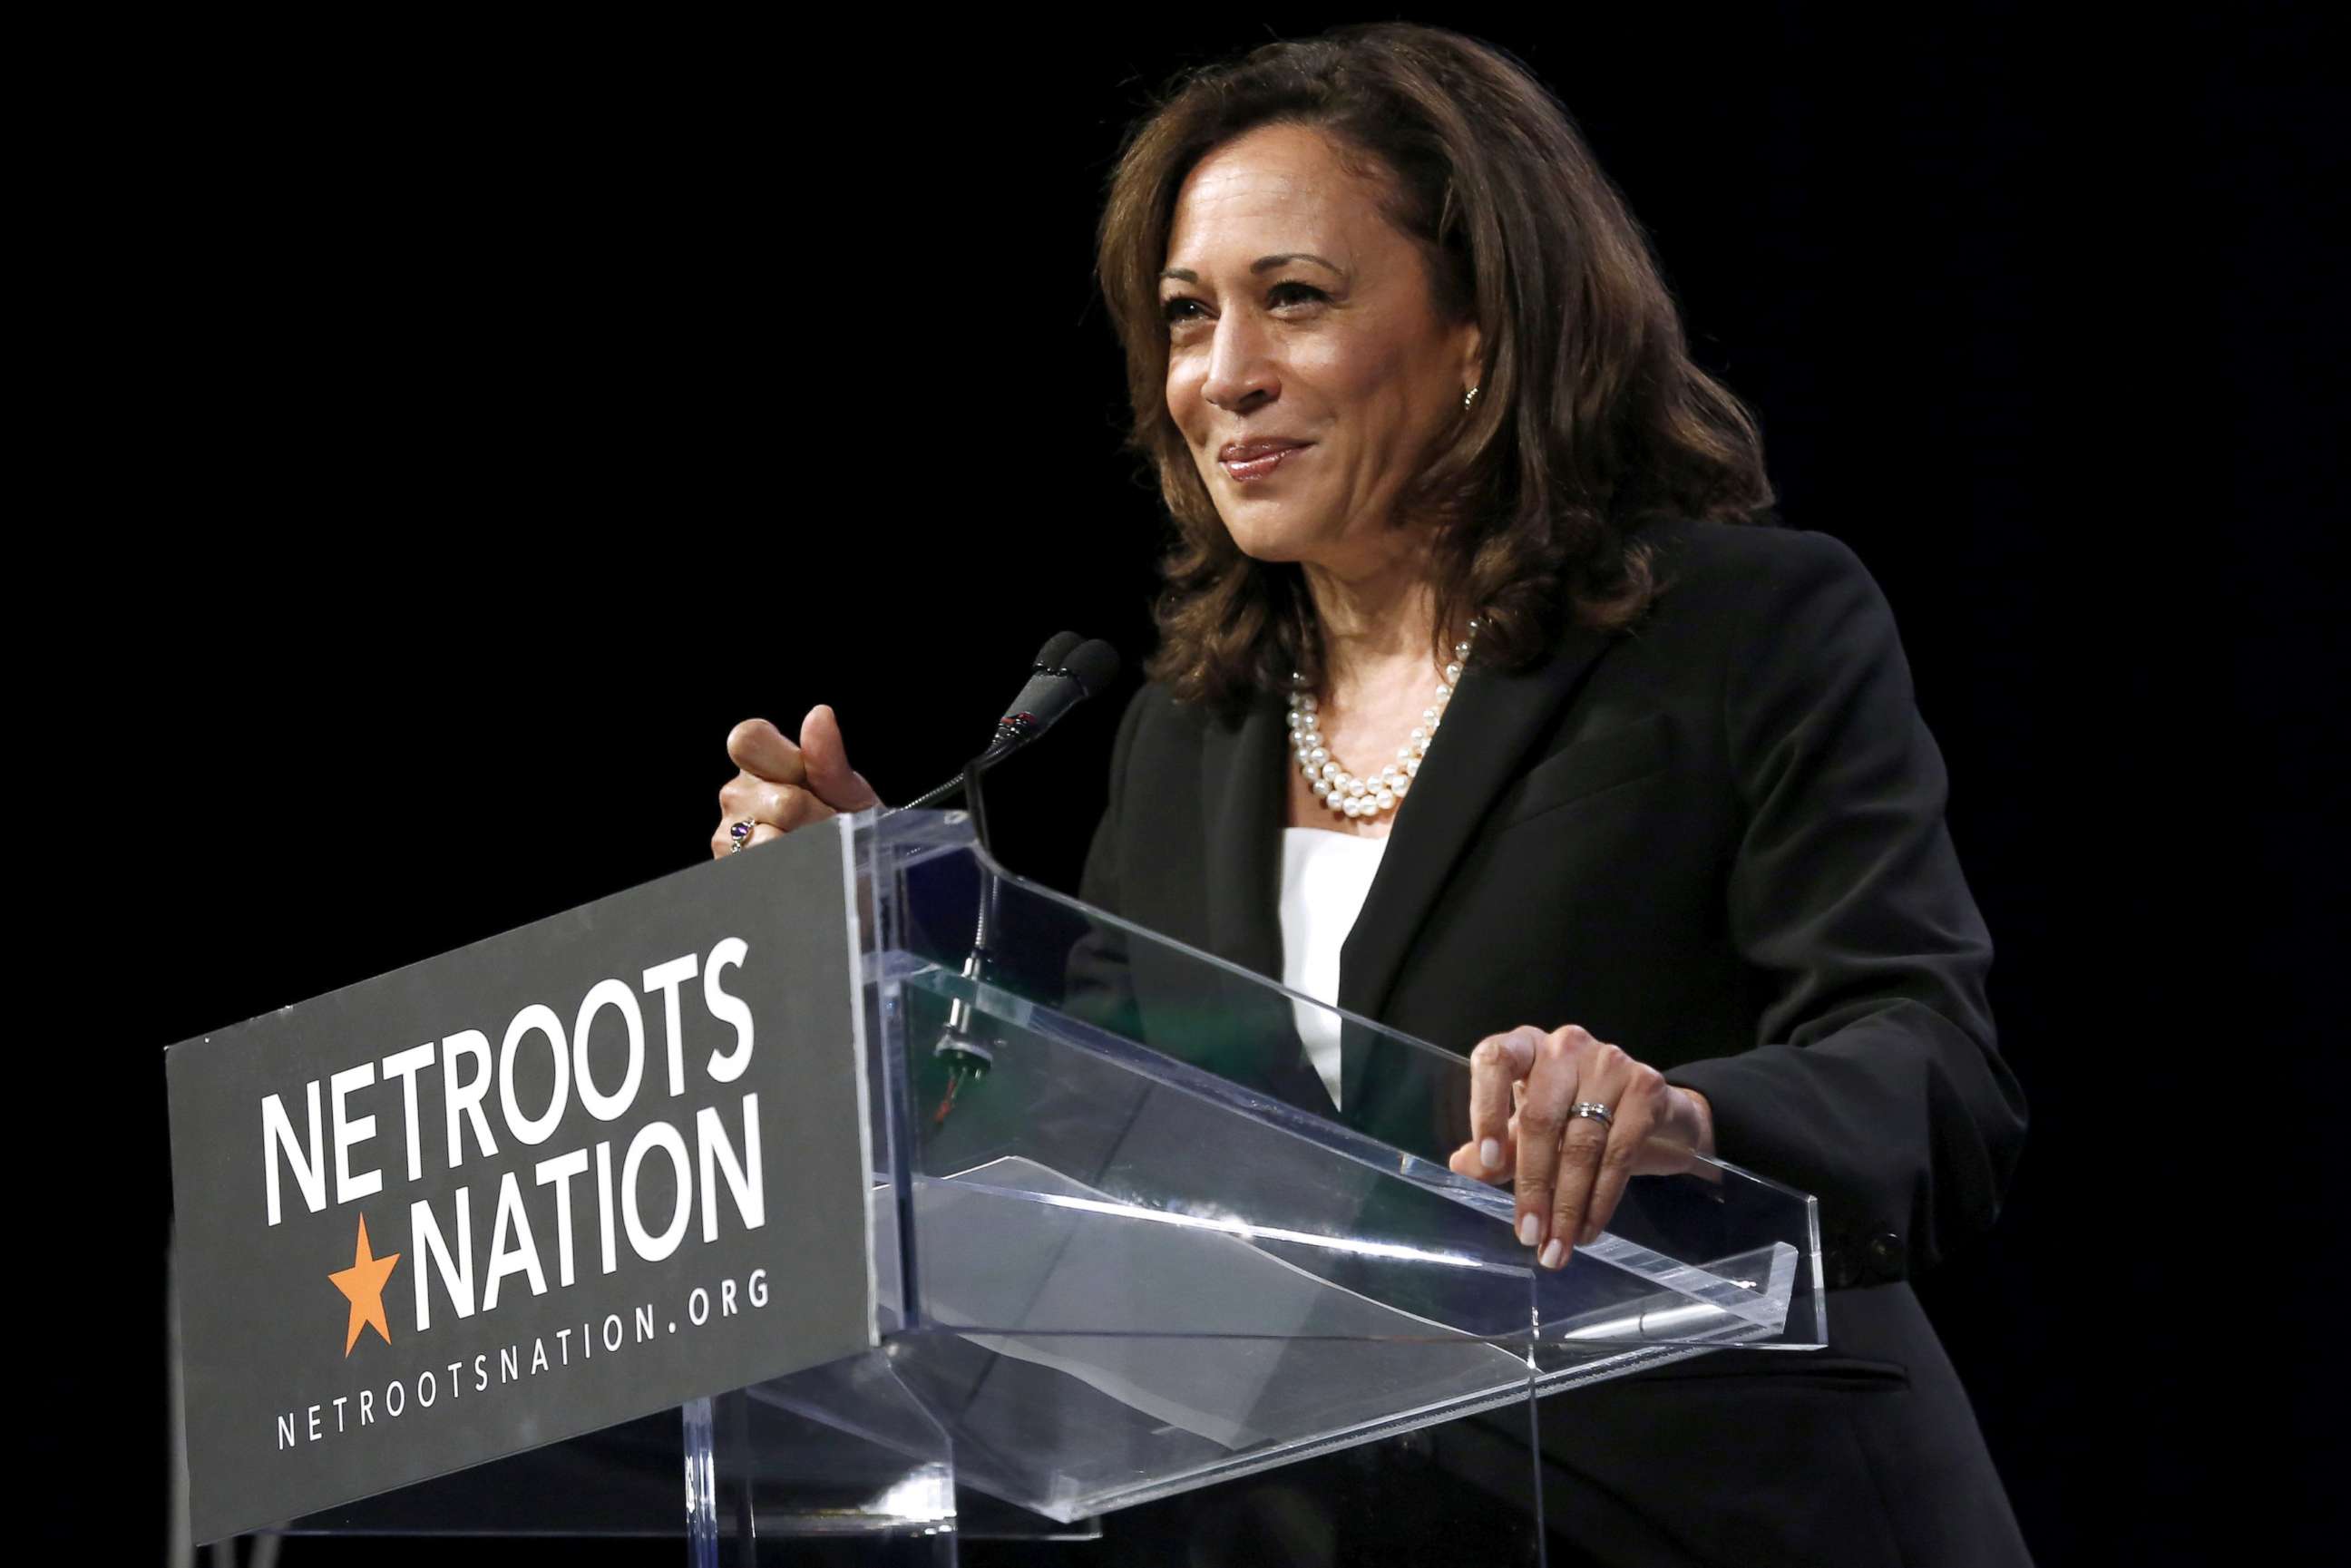 PHOTO: Senator Kamala D. Harris speaks at the Netroots Nation annual conference for political progressives in New Orleans, Aug. 3, 2018.